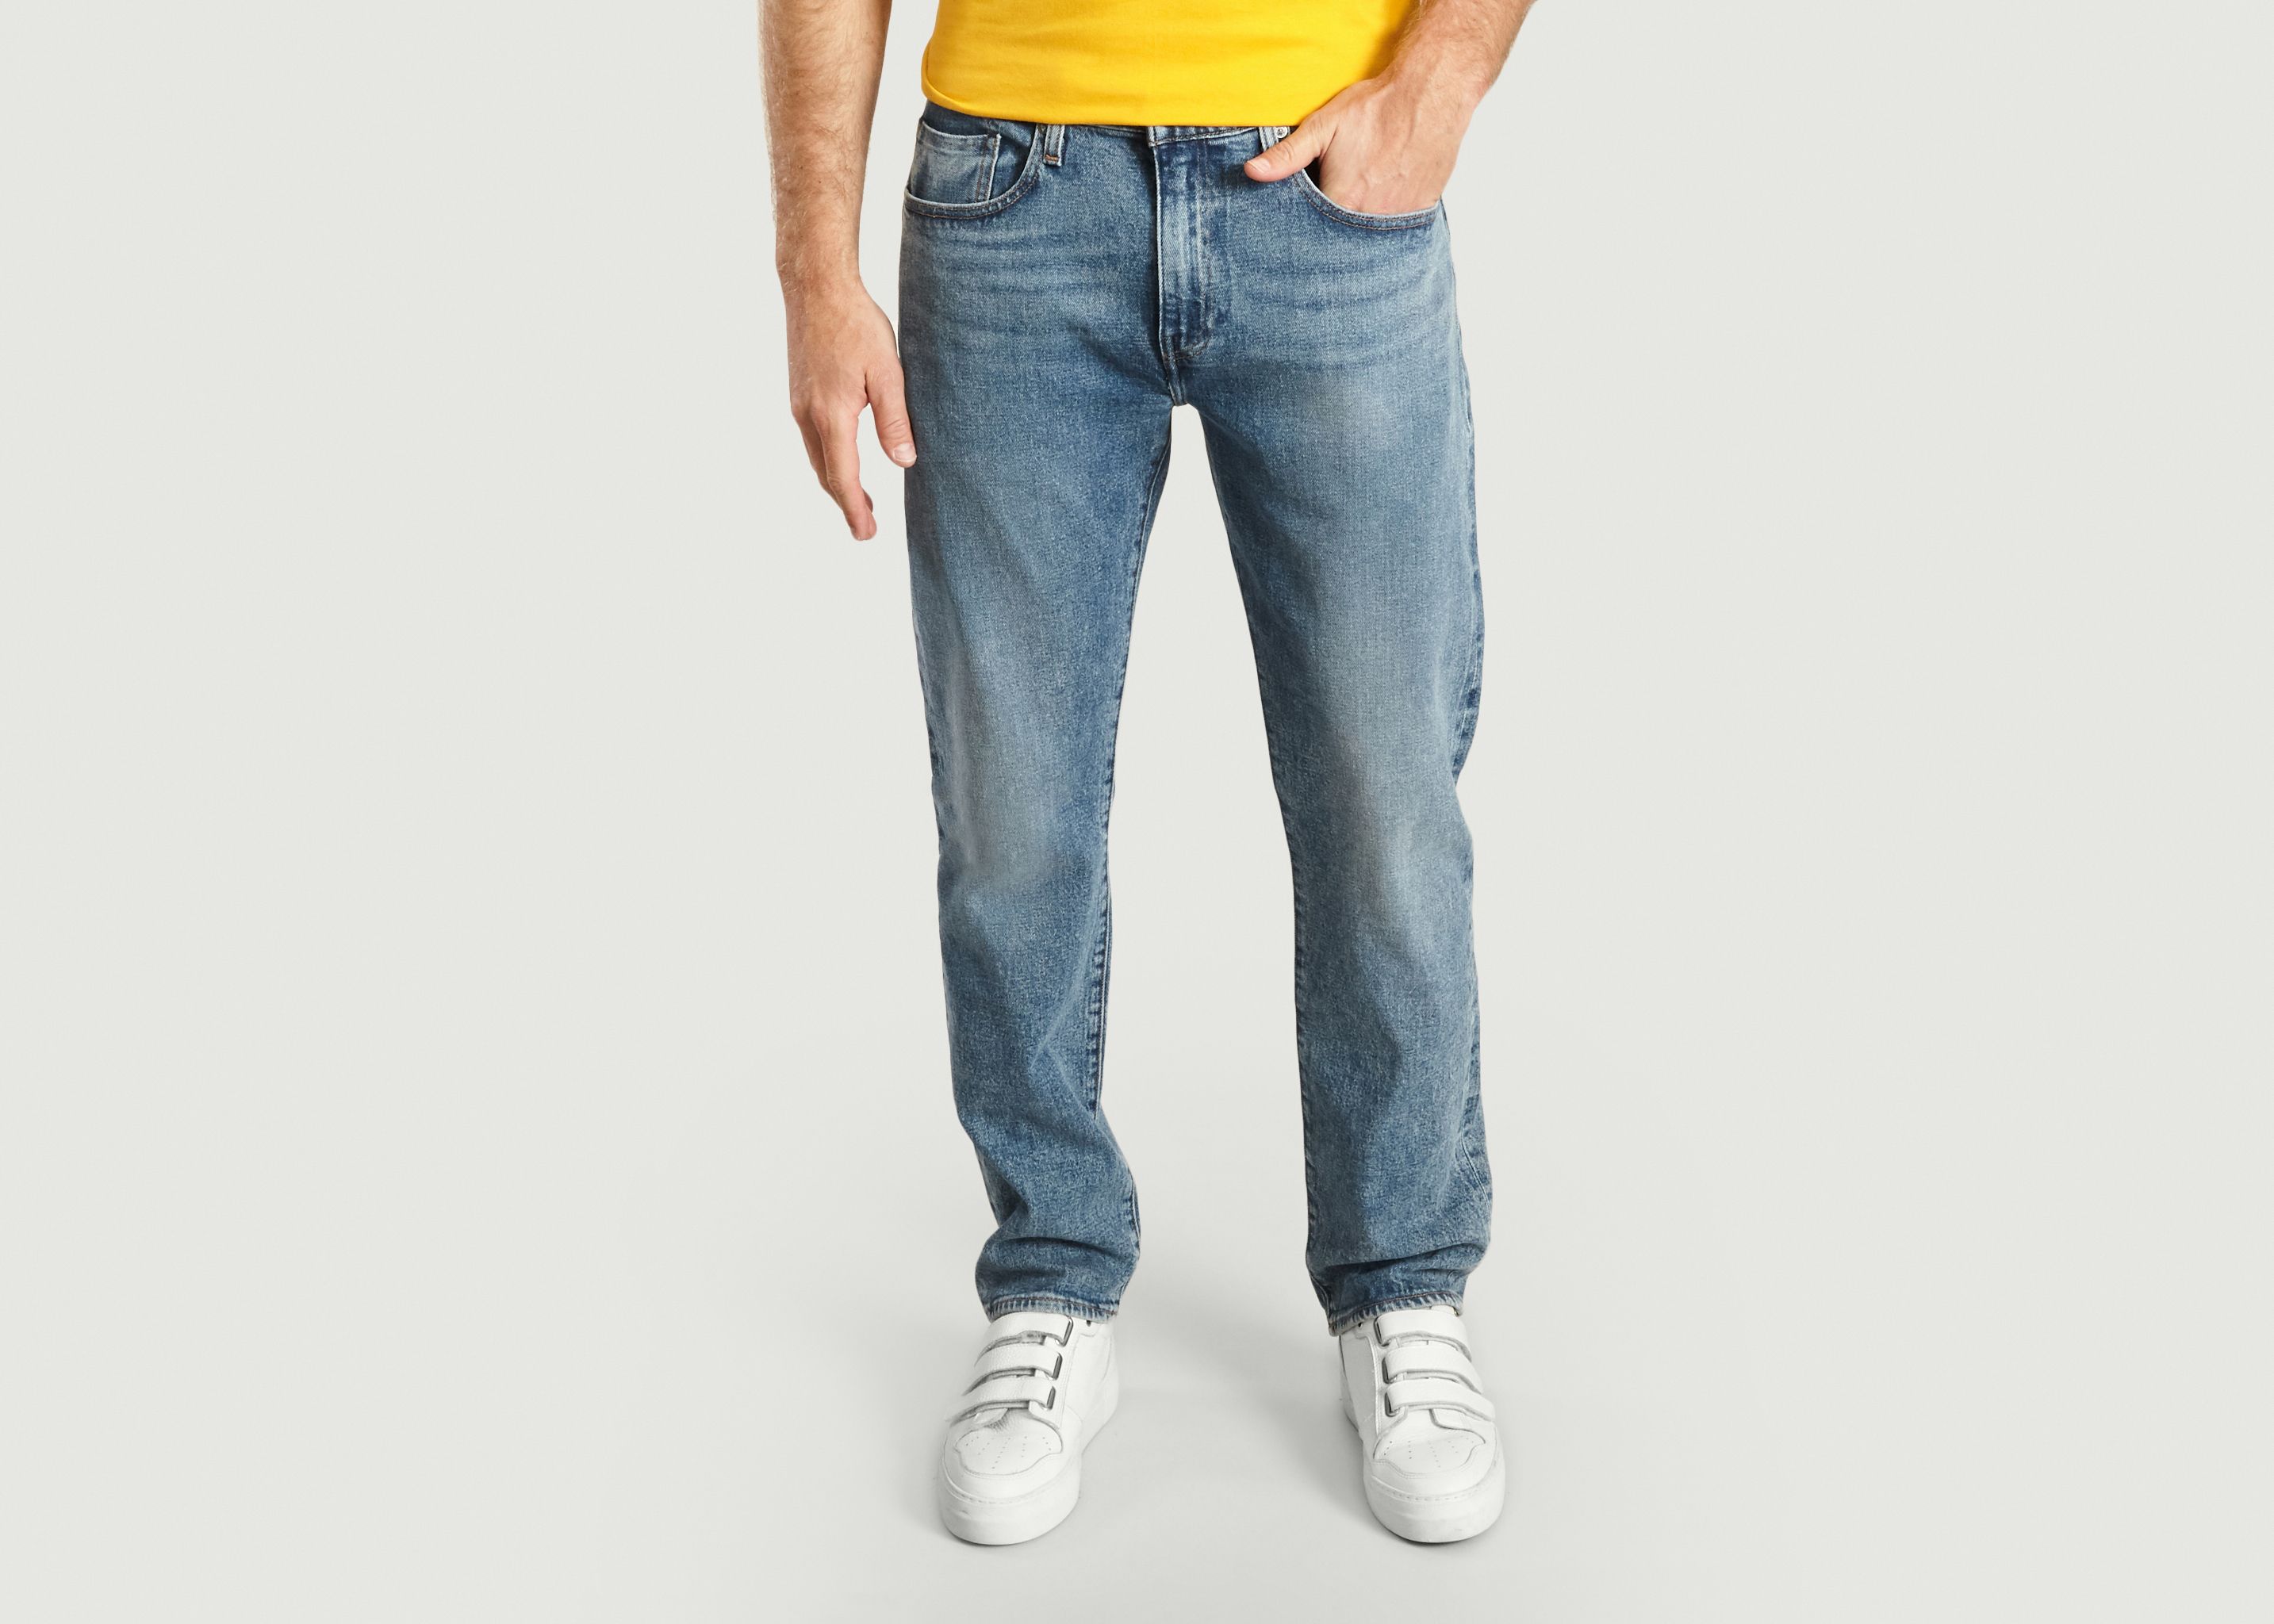 502 Refibra Selvedge Jeans Denim Levi's Made and Crafted | L'Exception